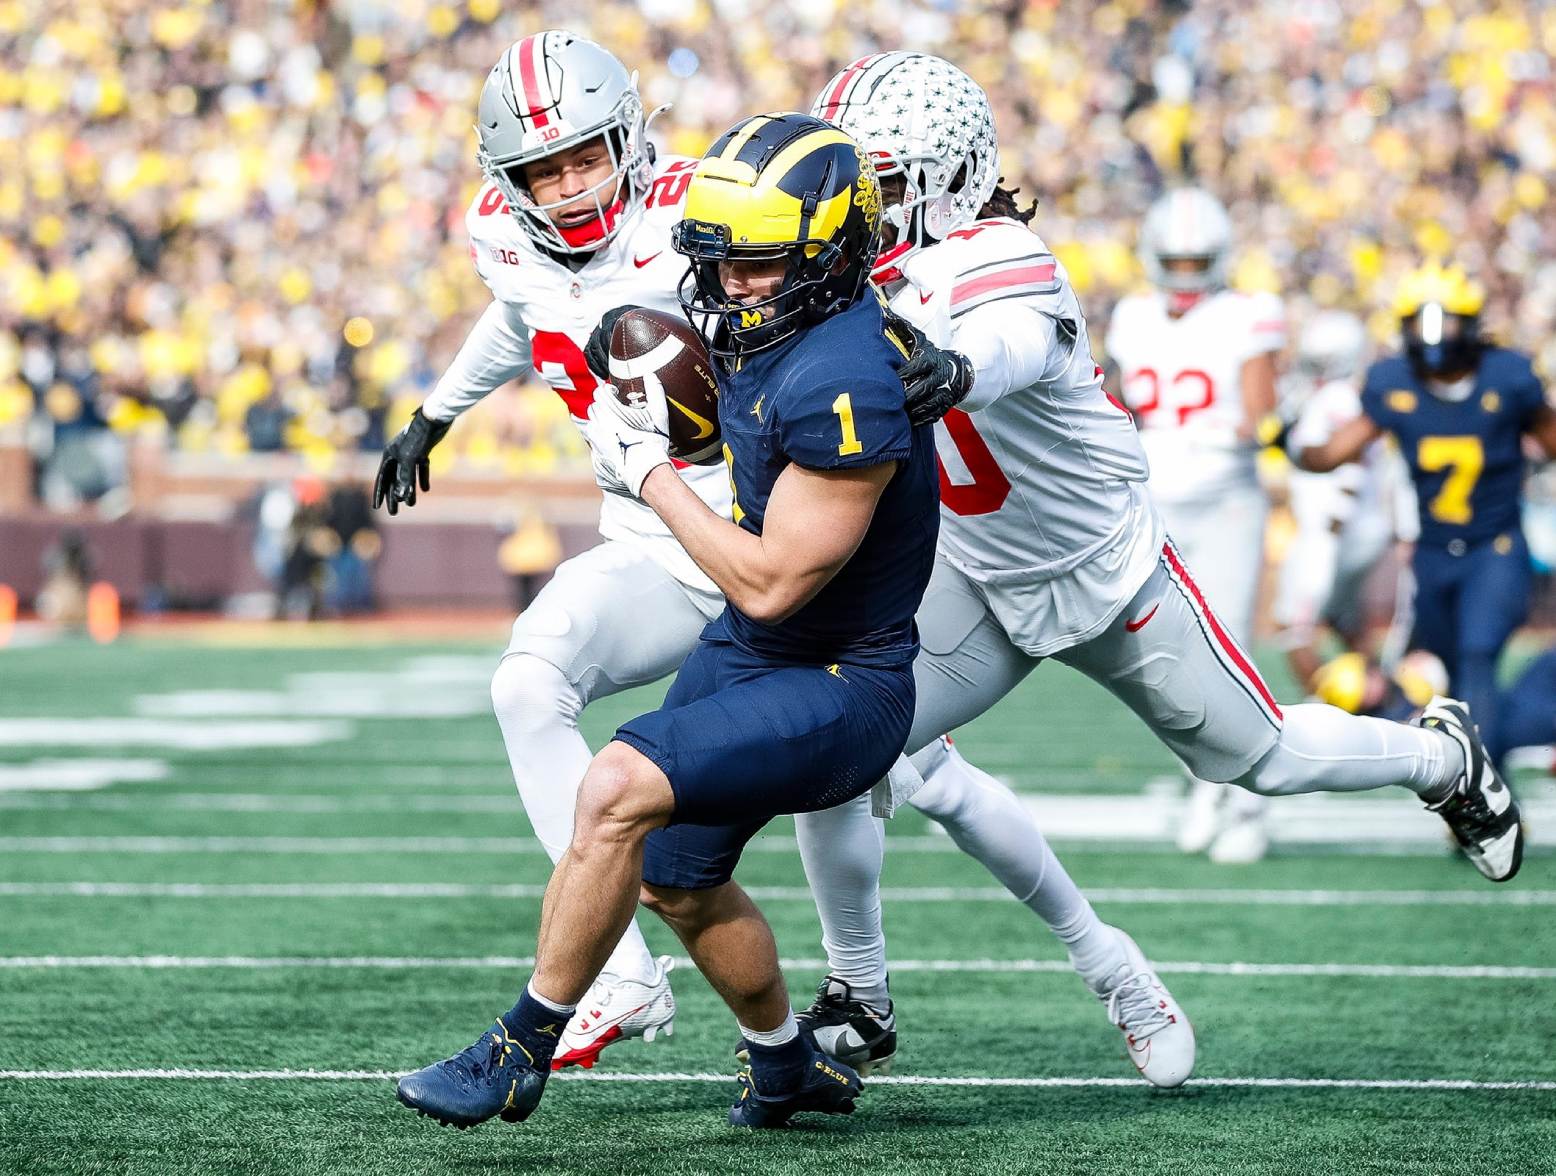 Michigan wide receiver Roman Wilson makes a catch against Ohio State safety Malik Hartford and cornerback Denzel Burke during the first half at Michigan Stadium in Ann Arbor on Saturday, Nov. 25, 2023. (Junfu Han/USA Today Network)